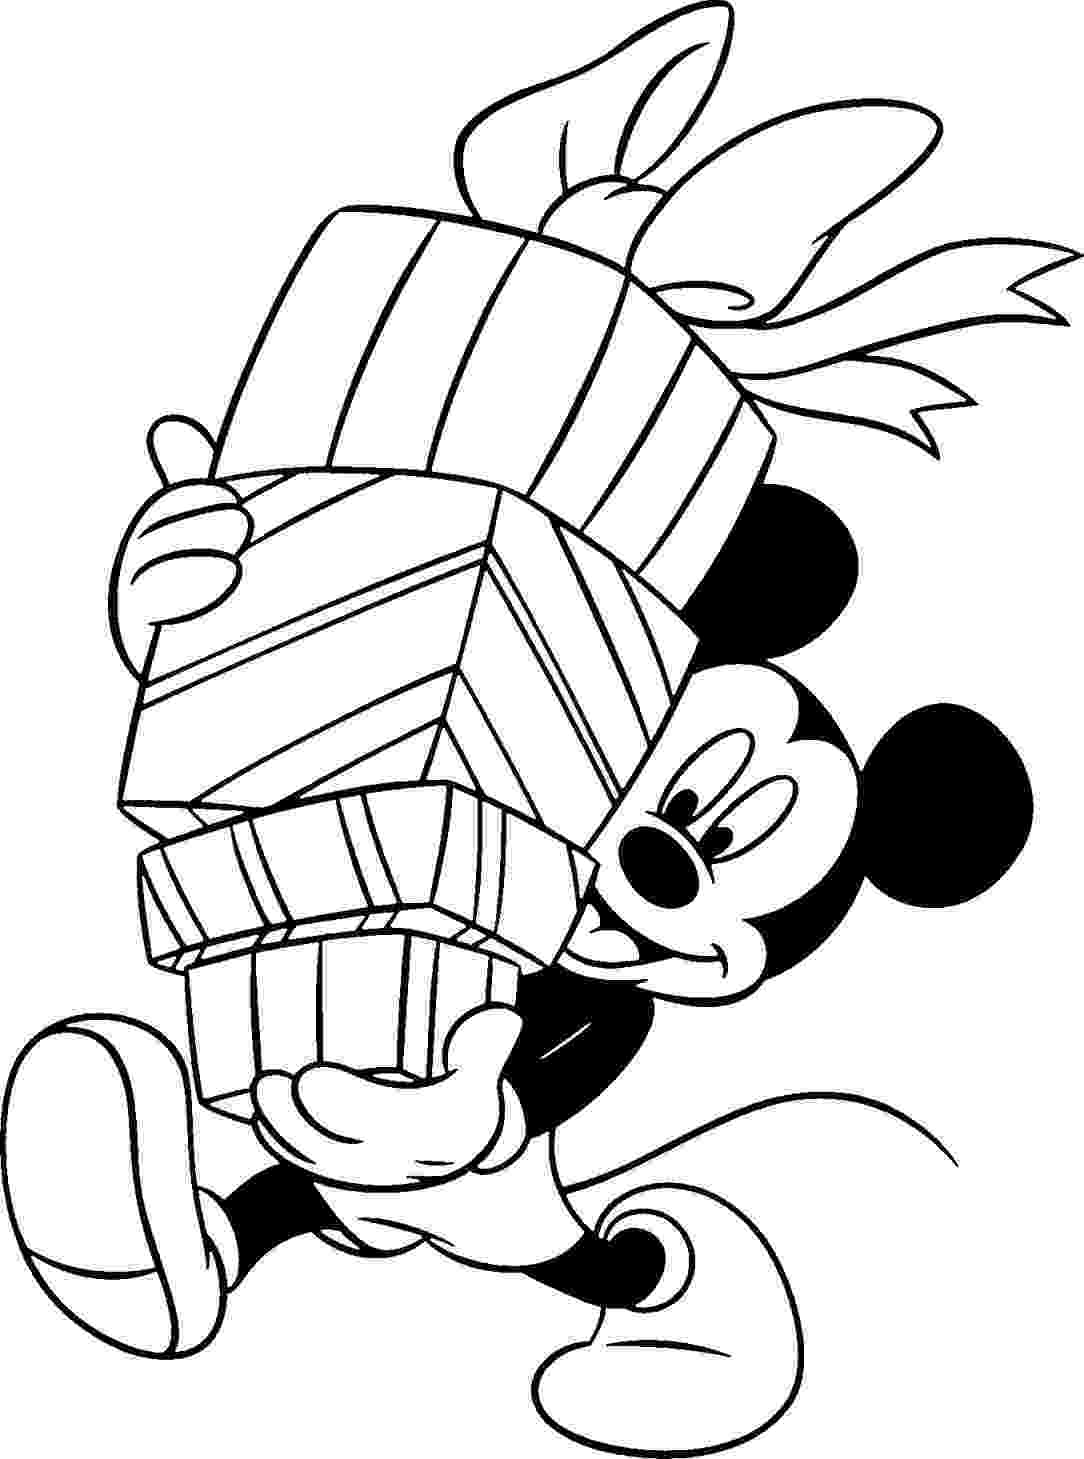 mickey mouse coloring pictures mickey mouse coloring pages 2018 dr odd mouse mickey pictures coloring 